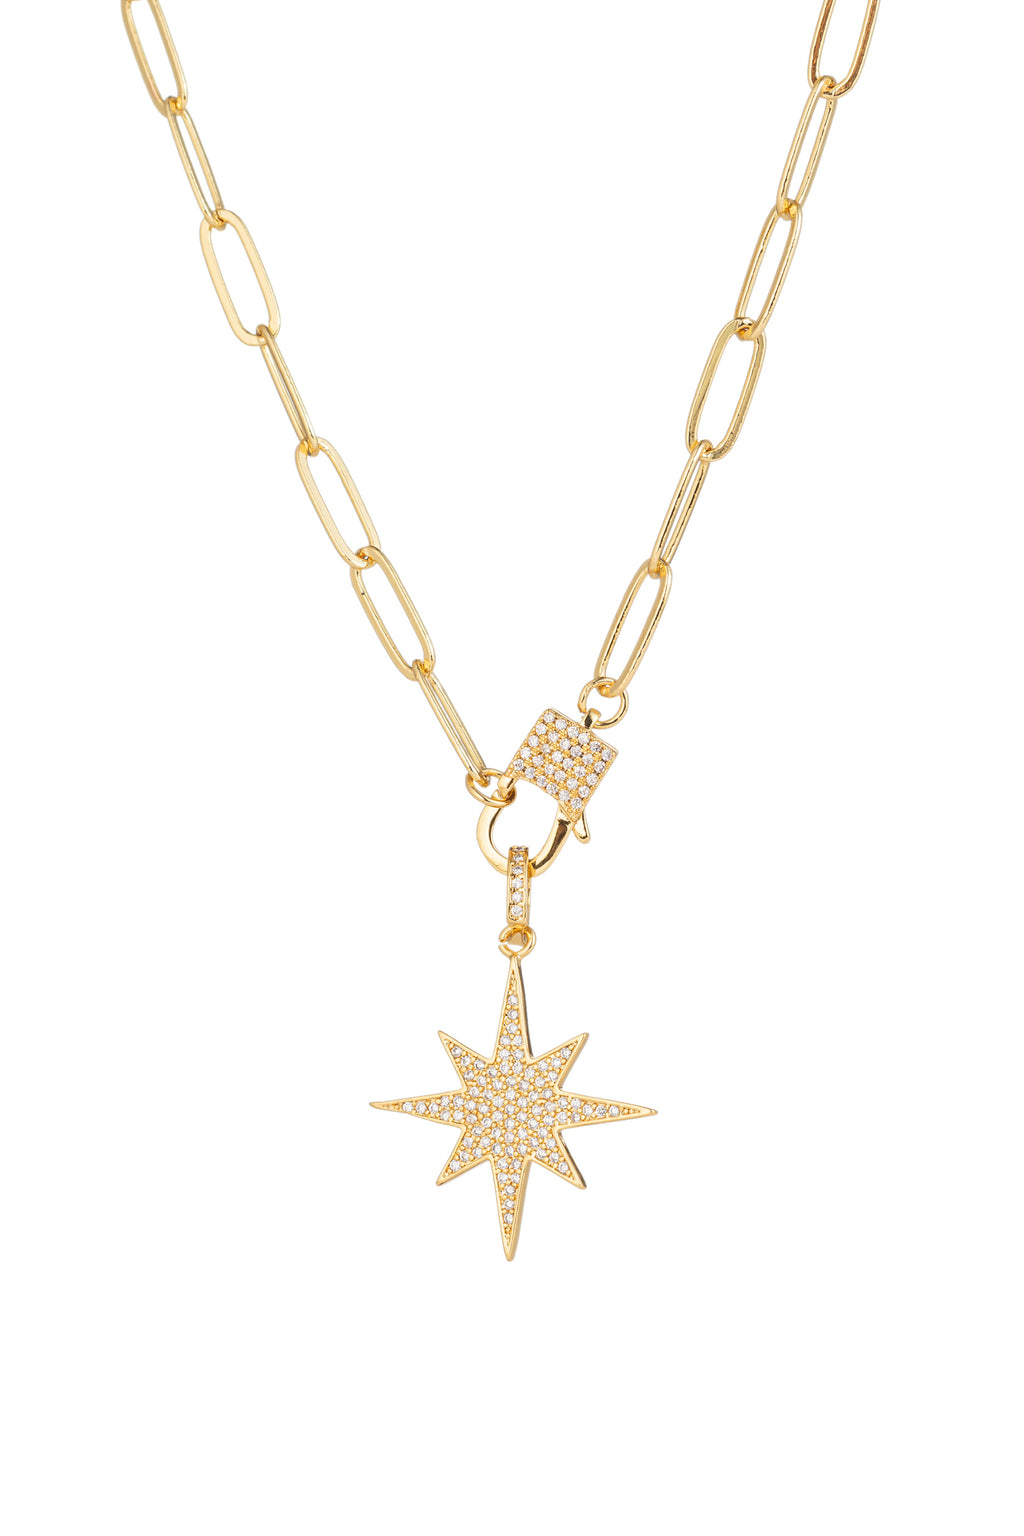 Sterling silver chain necklace with a brass North Star pendant that is studded with CZ crystals.